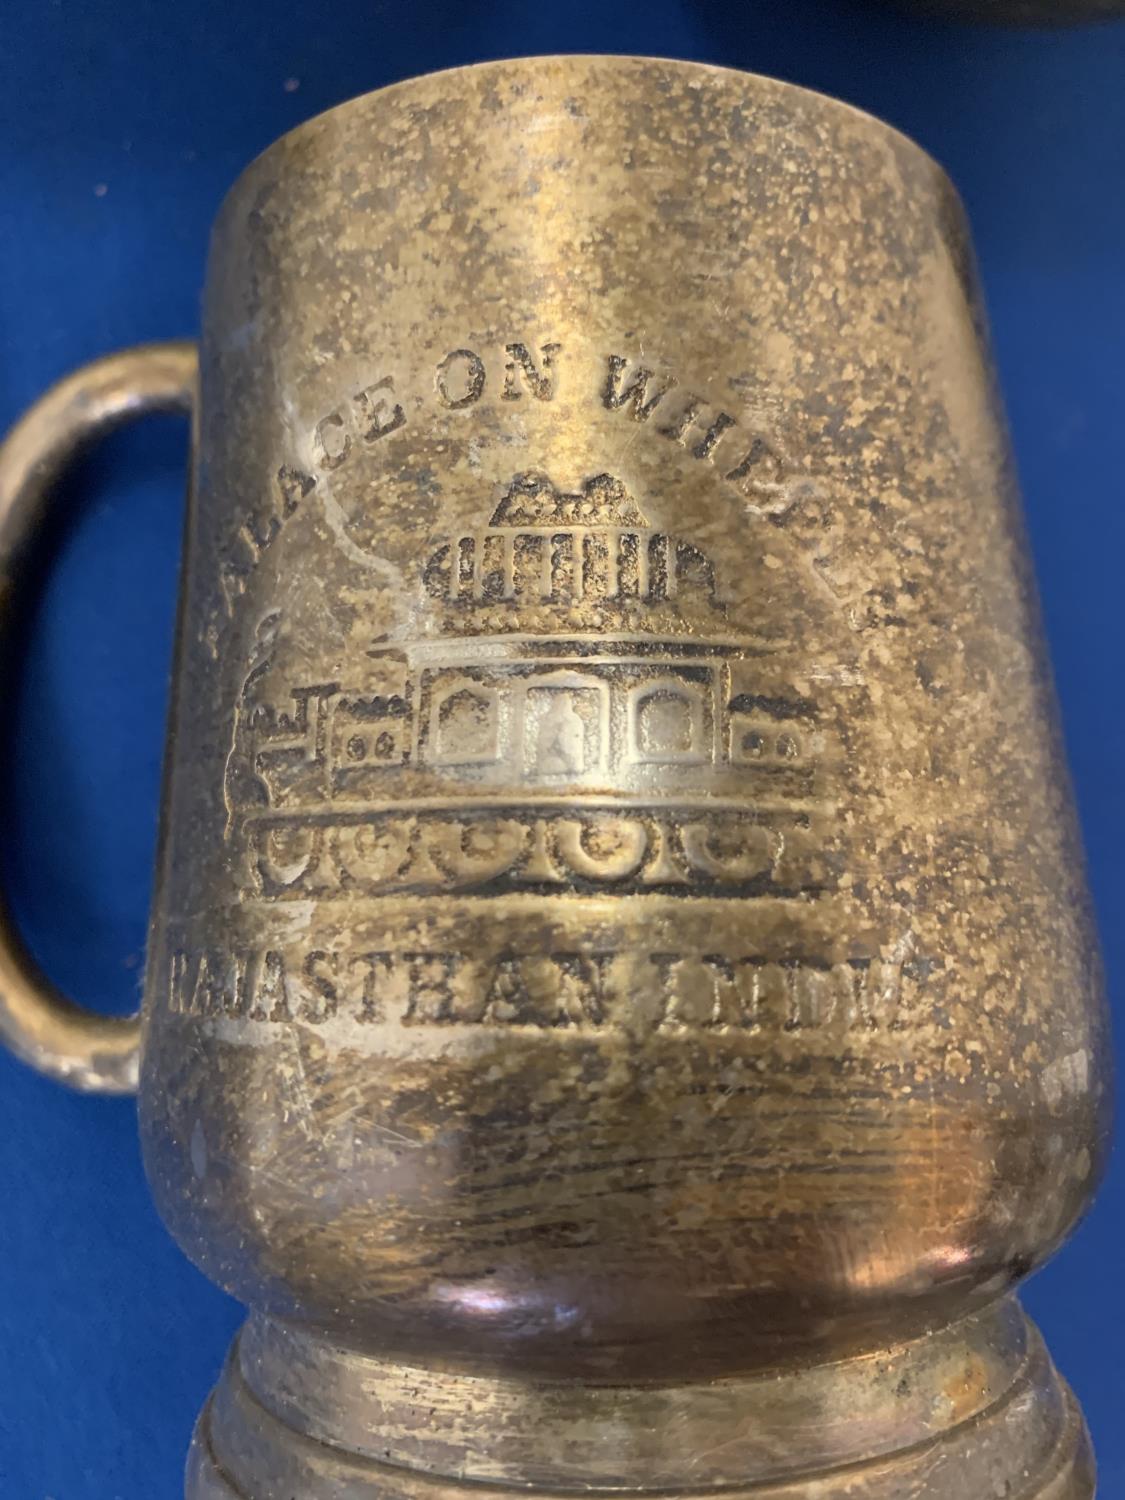 VARIOUS METAL ITEMS TO INCLUDE A 'PALACE ON WHEELS INDIA' TANKARD, BRASS BOWLS ETC - Image 2 of 3